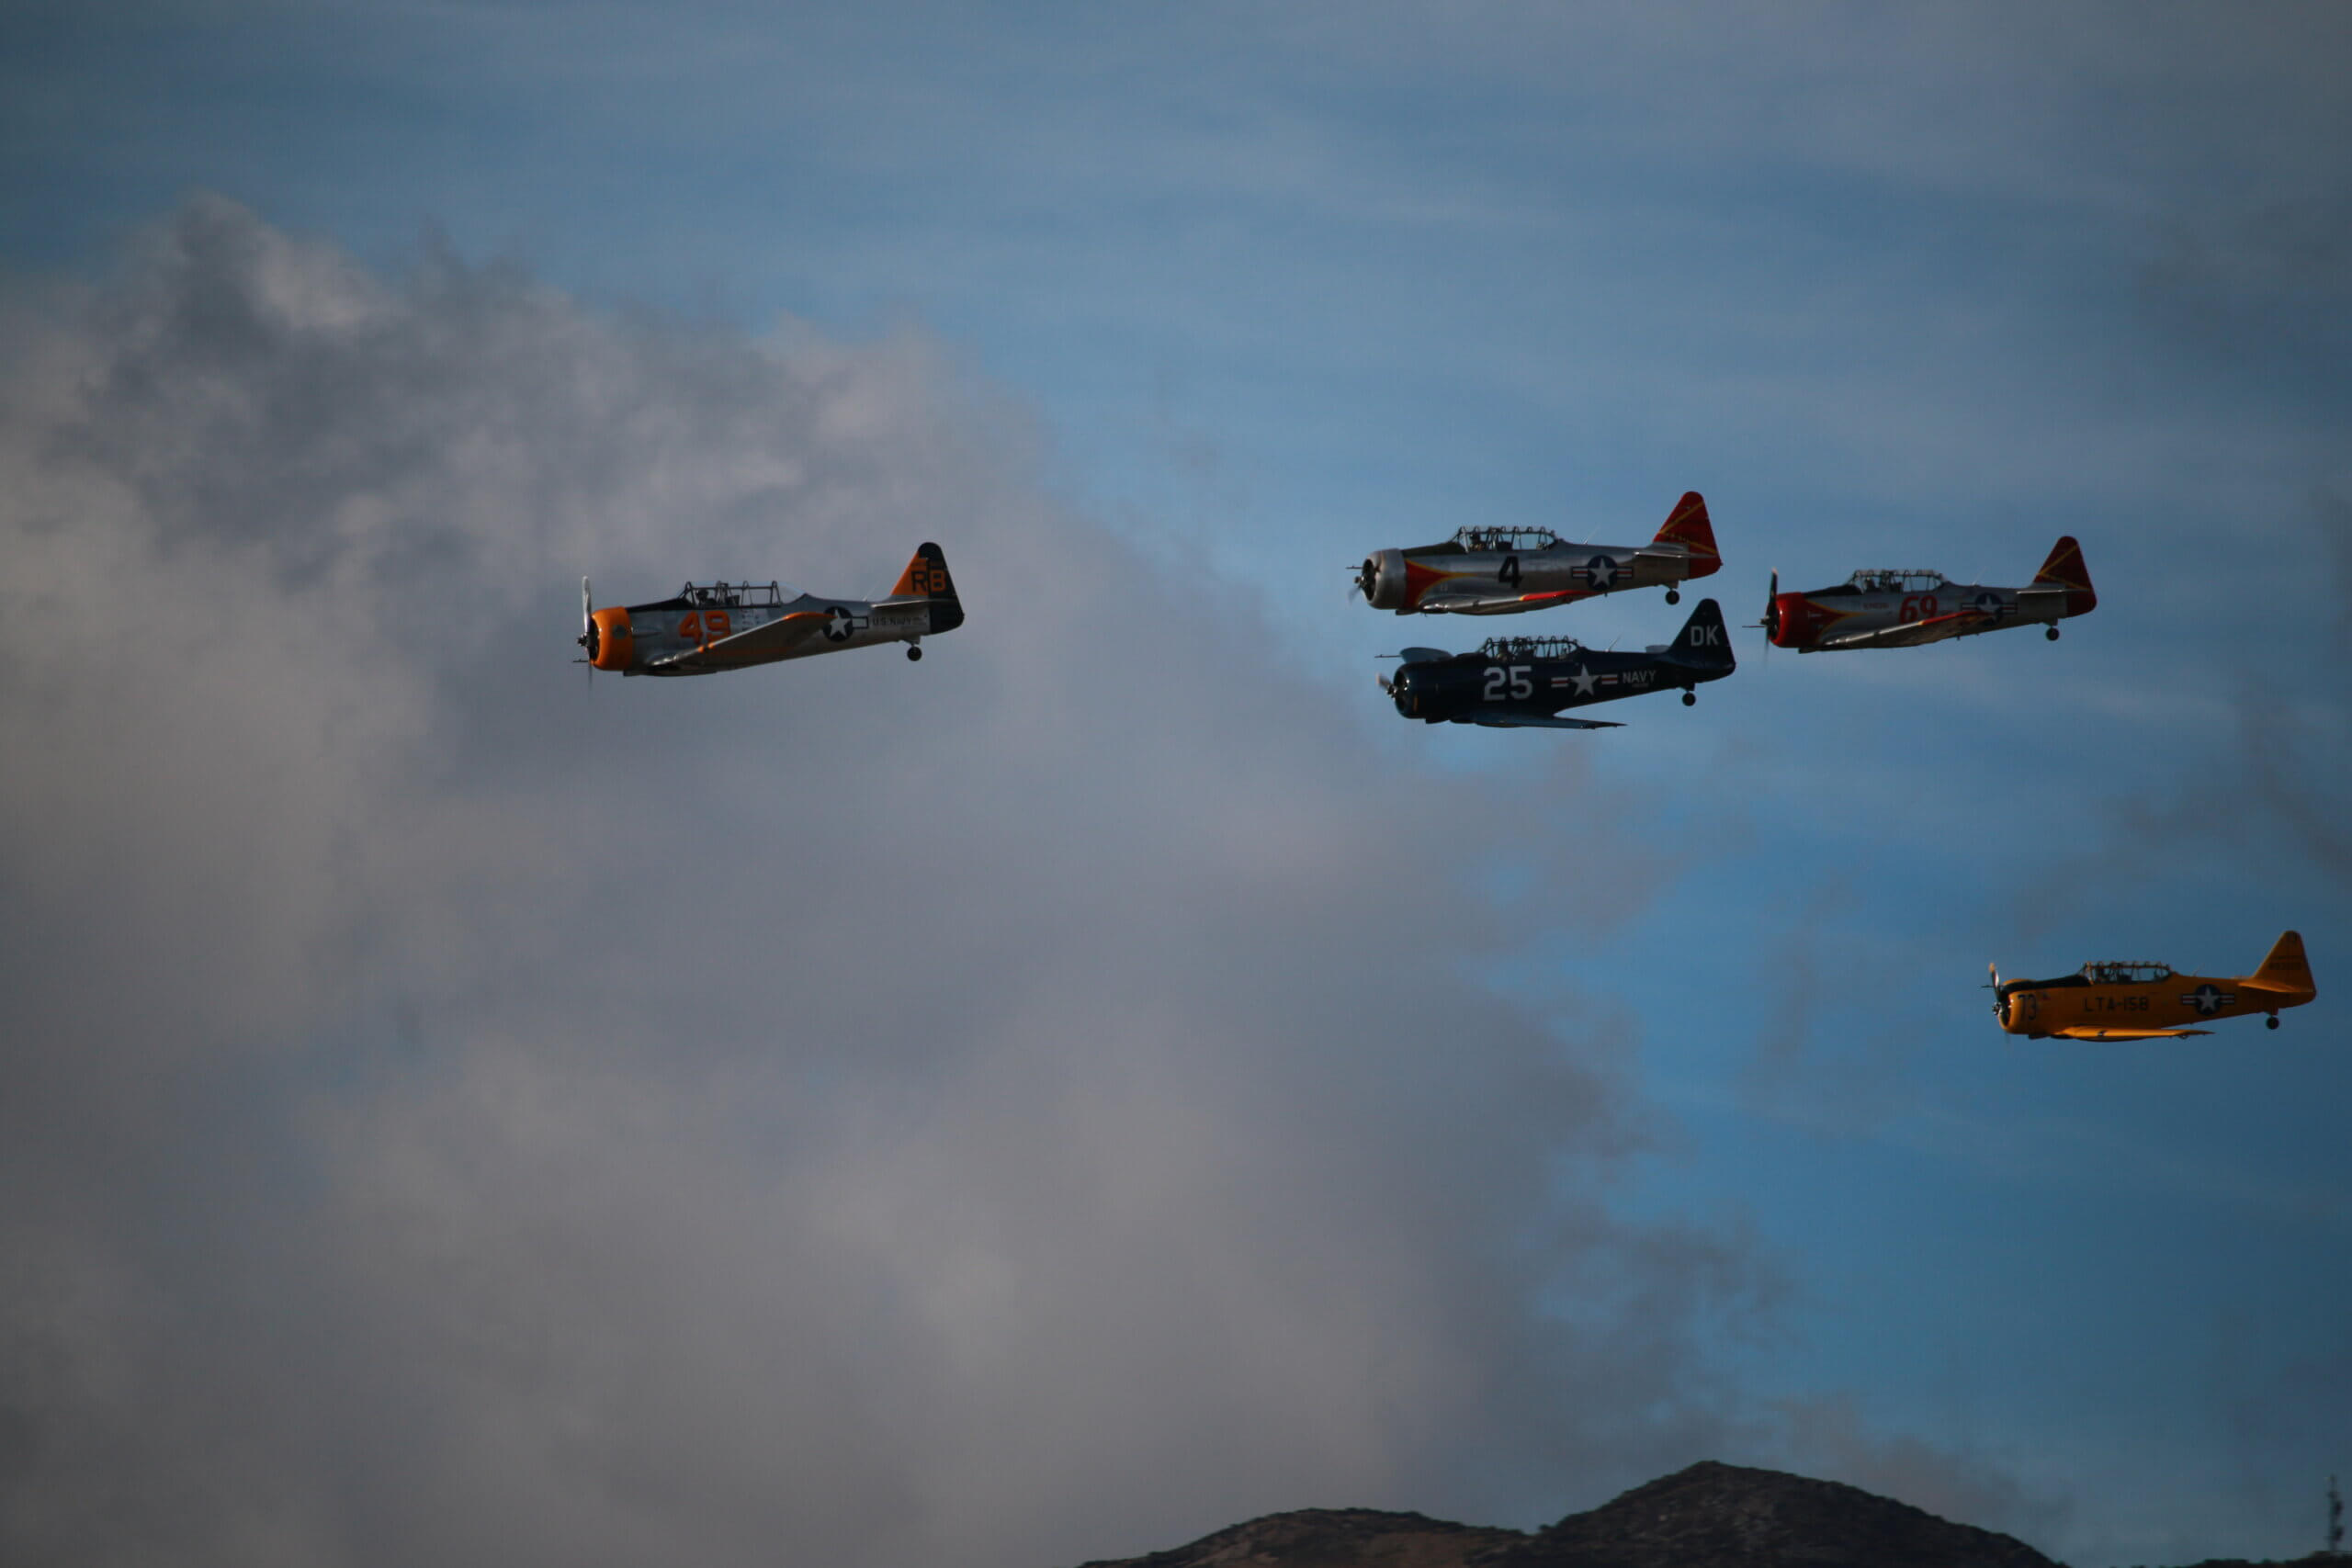 Multiple T-6s competing in a race